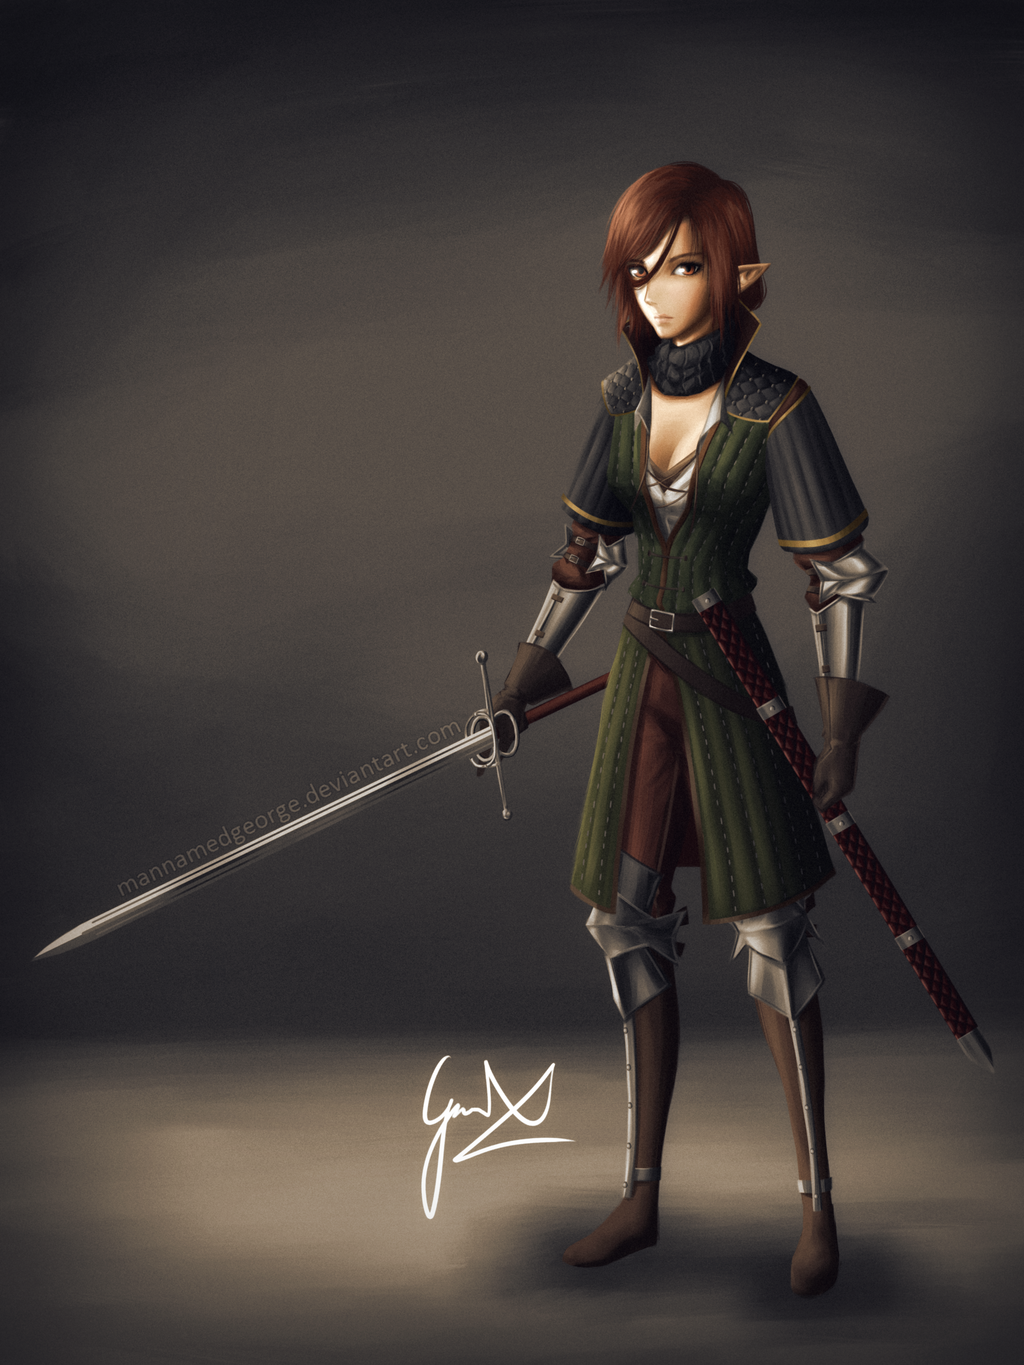 val_character_concept_by_mannamedgeorge-d9t2mc3.png